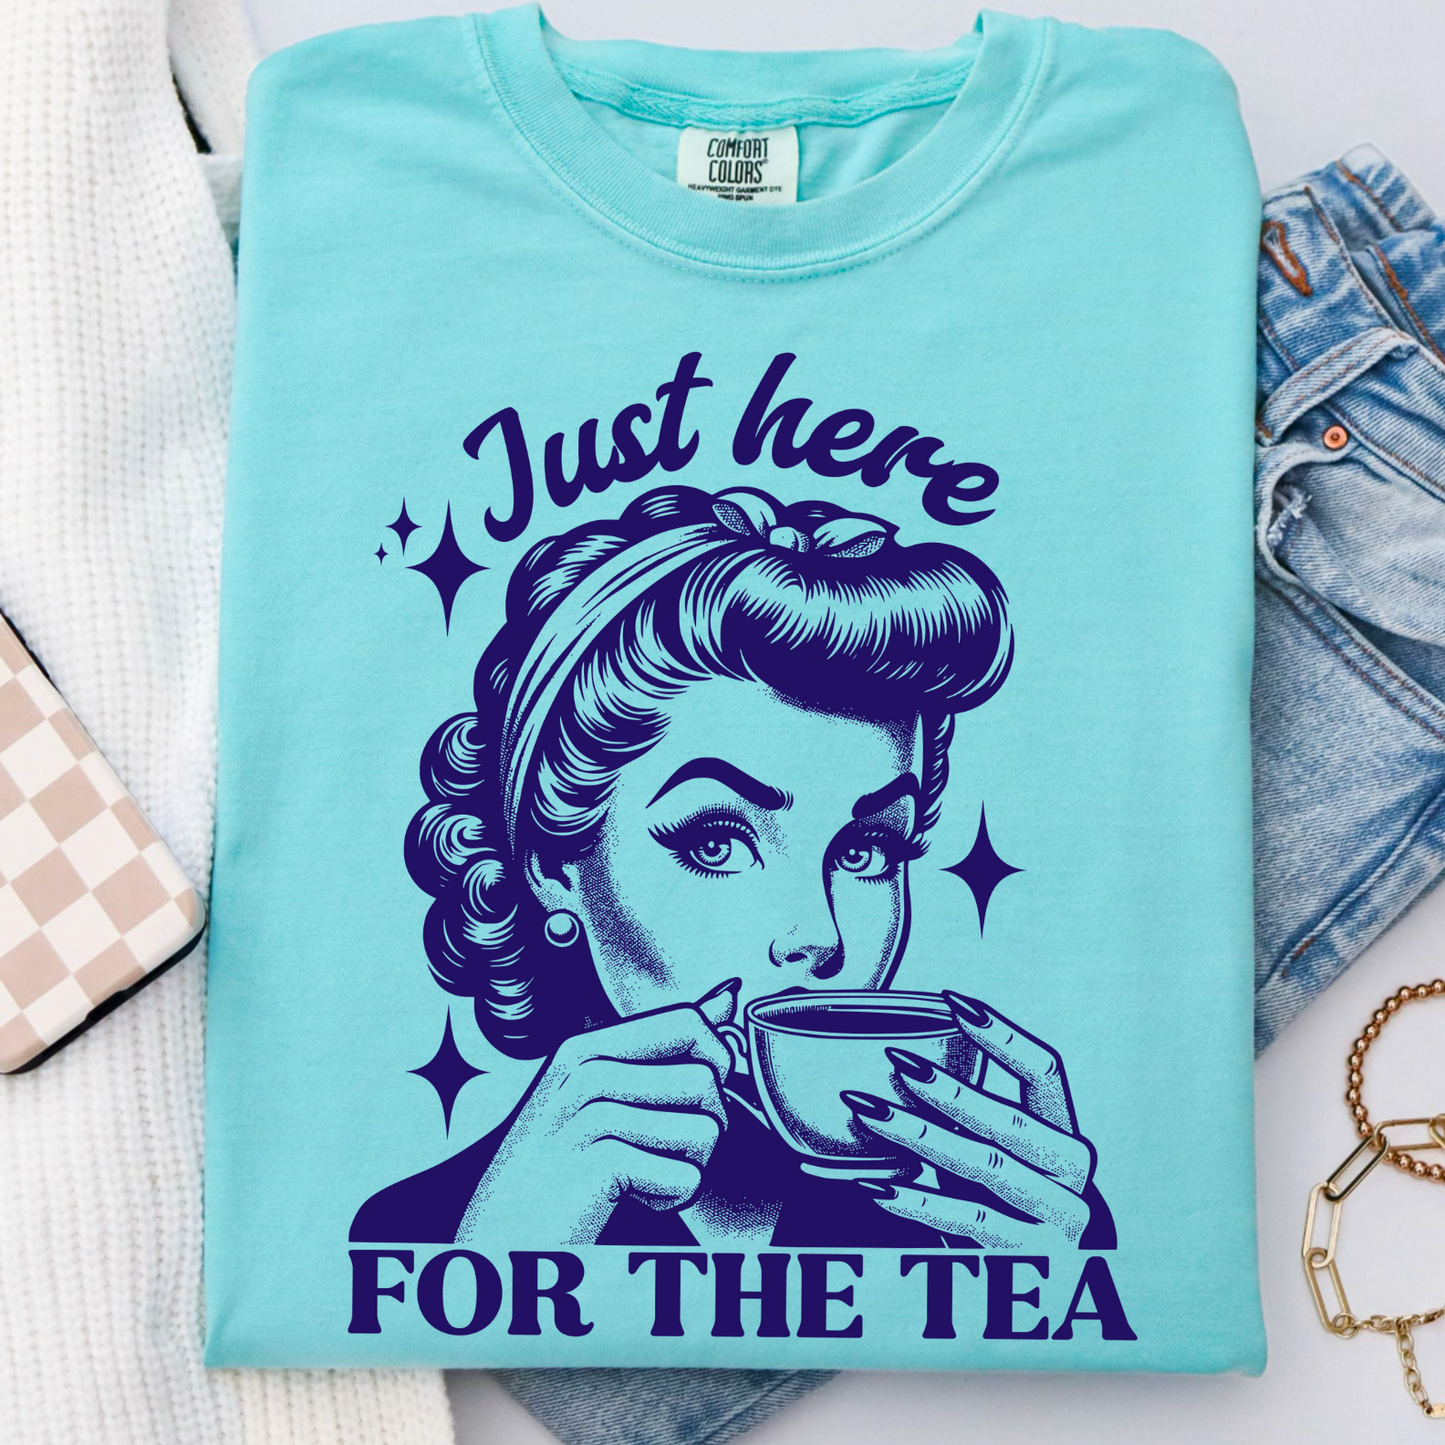 Just Here For The Tea Comfort Color Graphic Tee As Pictured Is Lagoon Blue